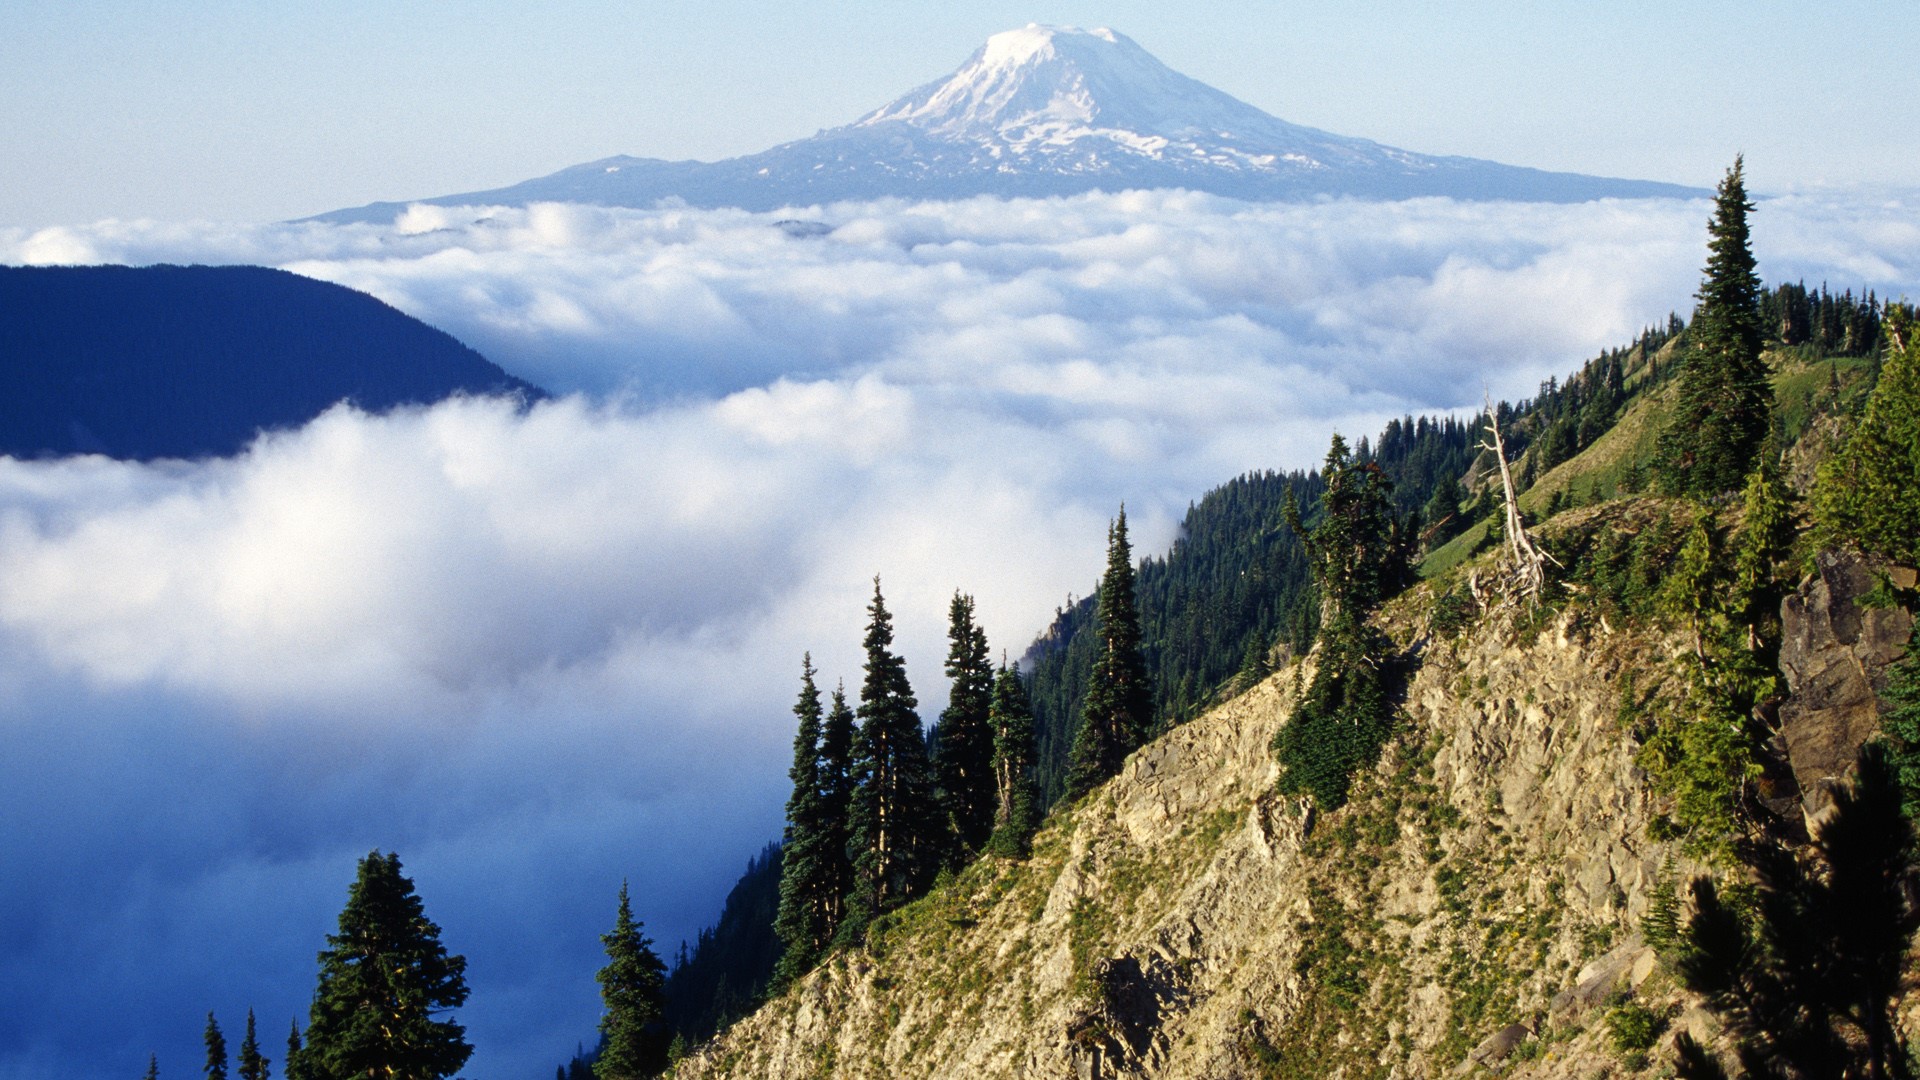 General 1920x1080 nature landscape mountains trees forest far view clouds snowy peak sky Mount Adams Washington USA